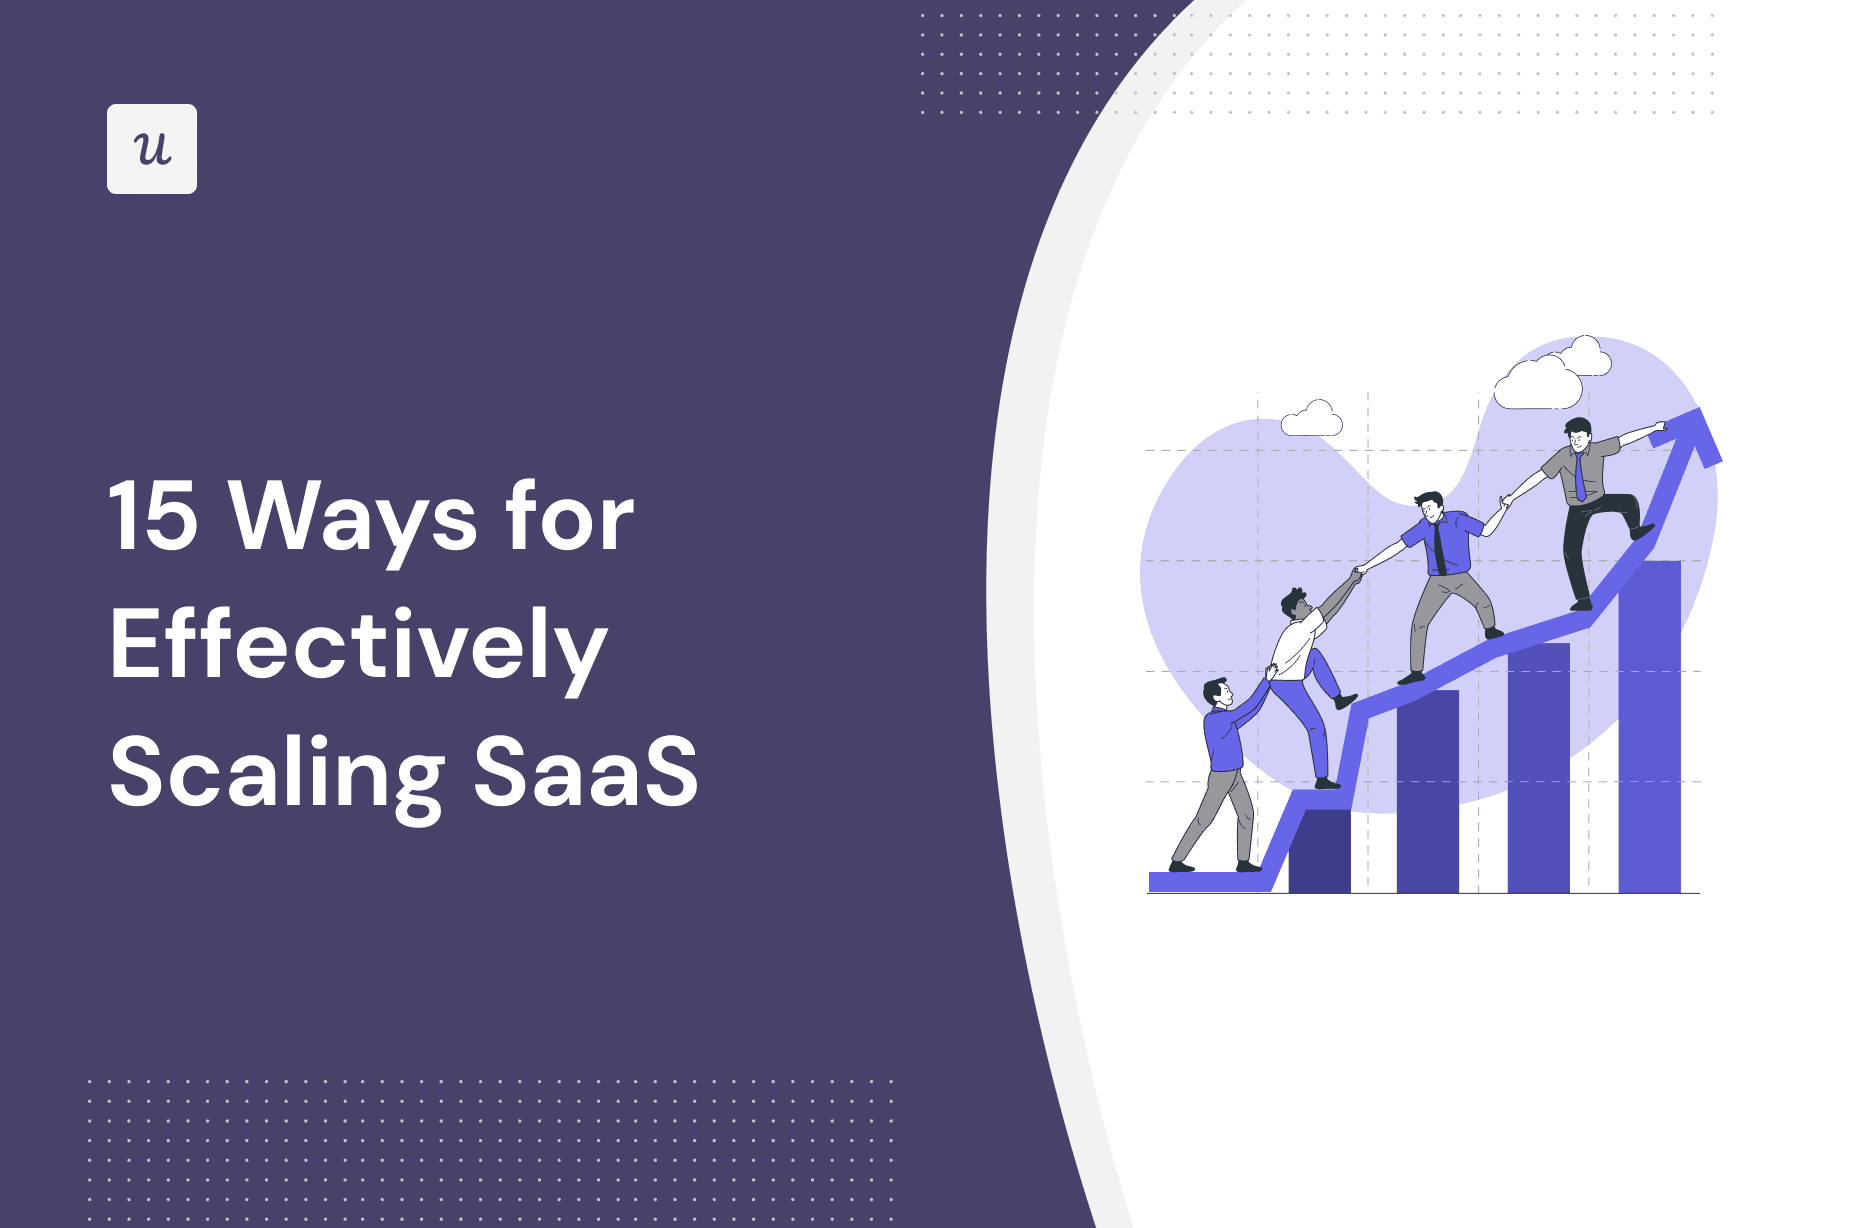 15 Ways for Effectively Scaling SaaS cover